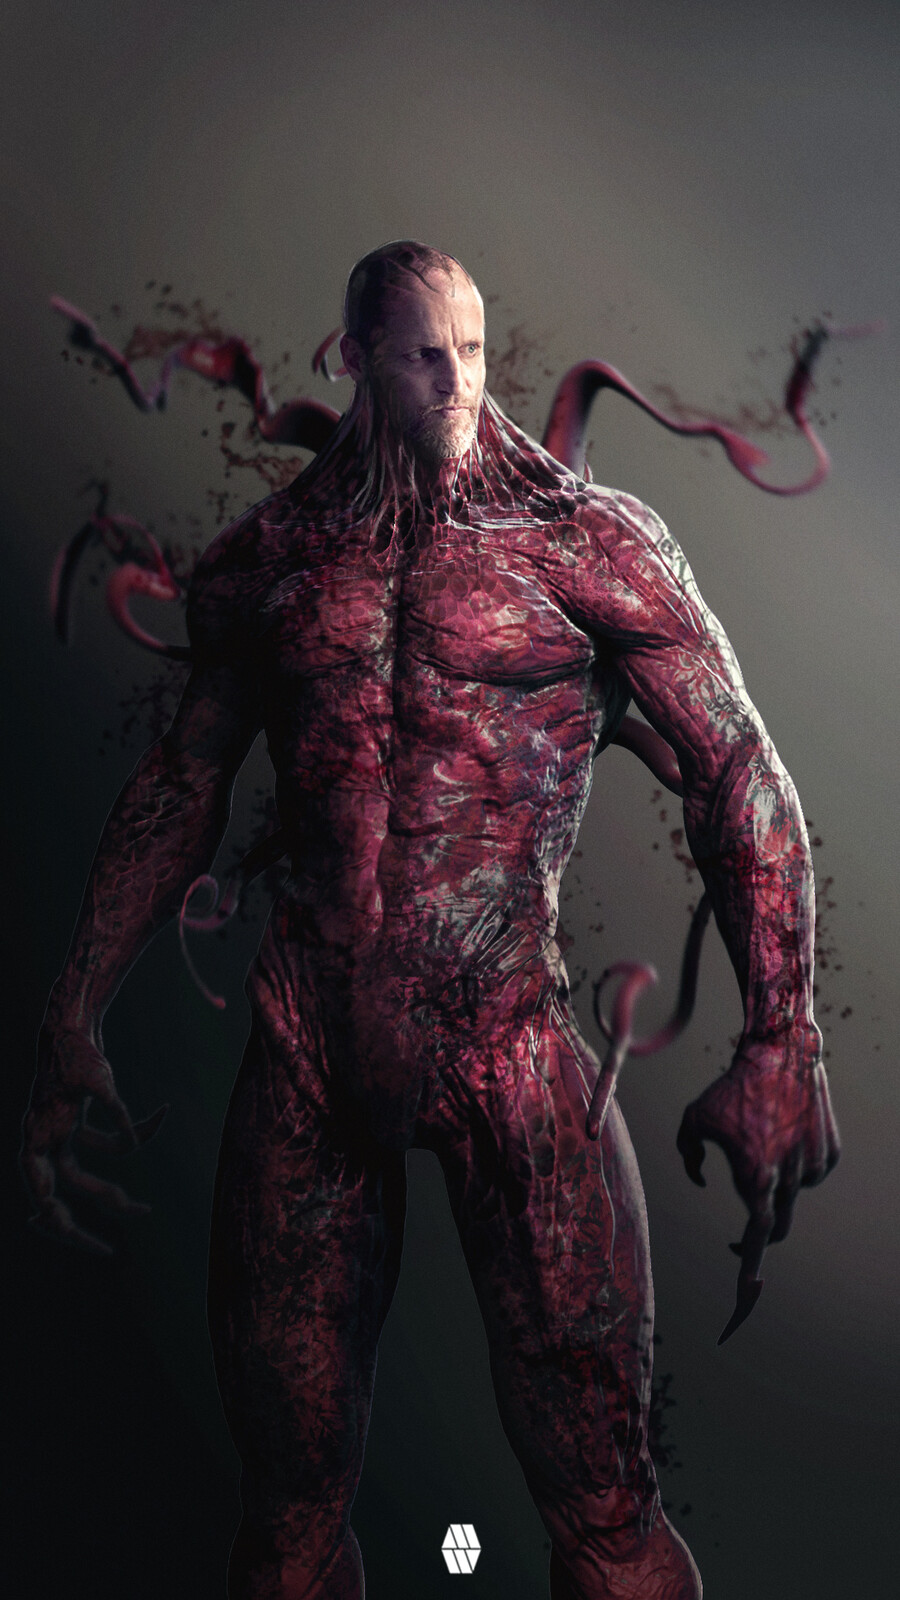 Cletus Kasady Emerges - Personal Project